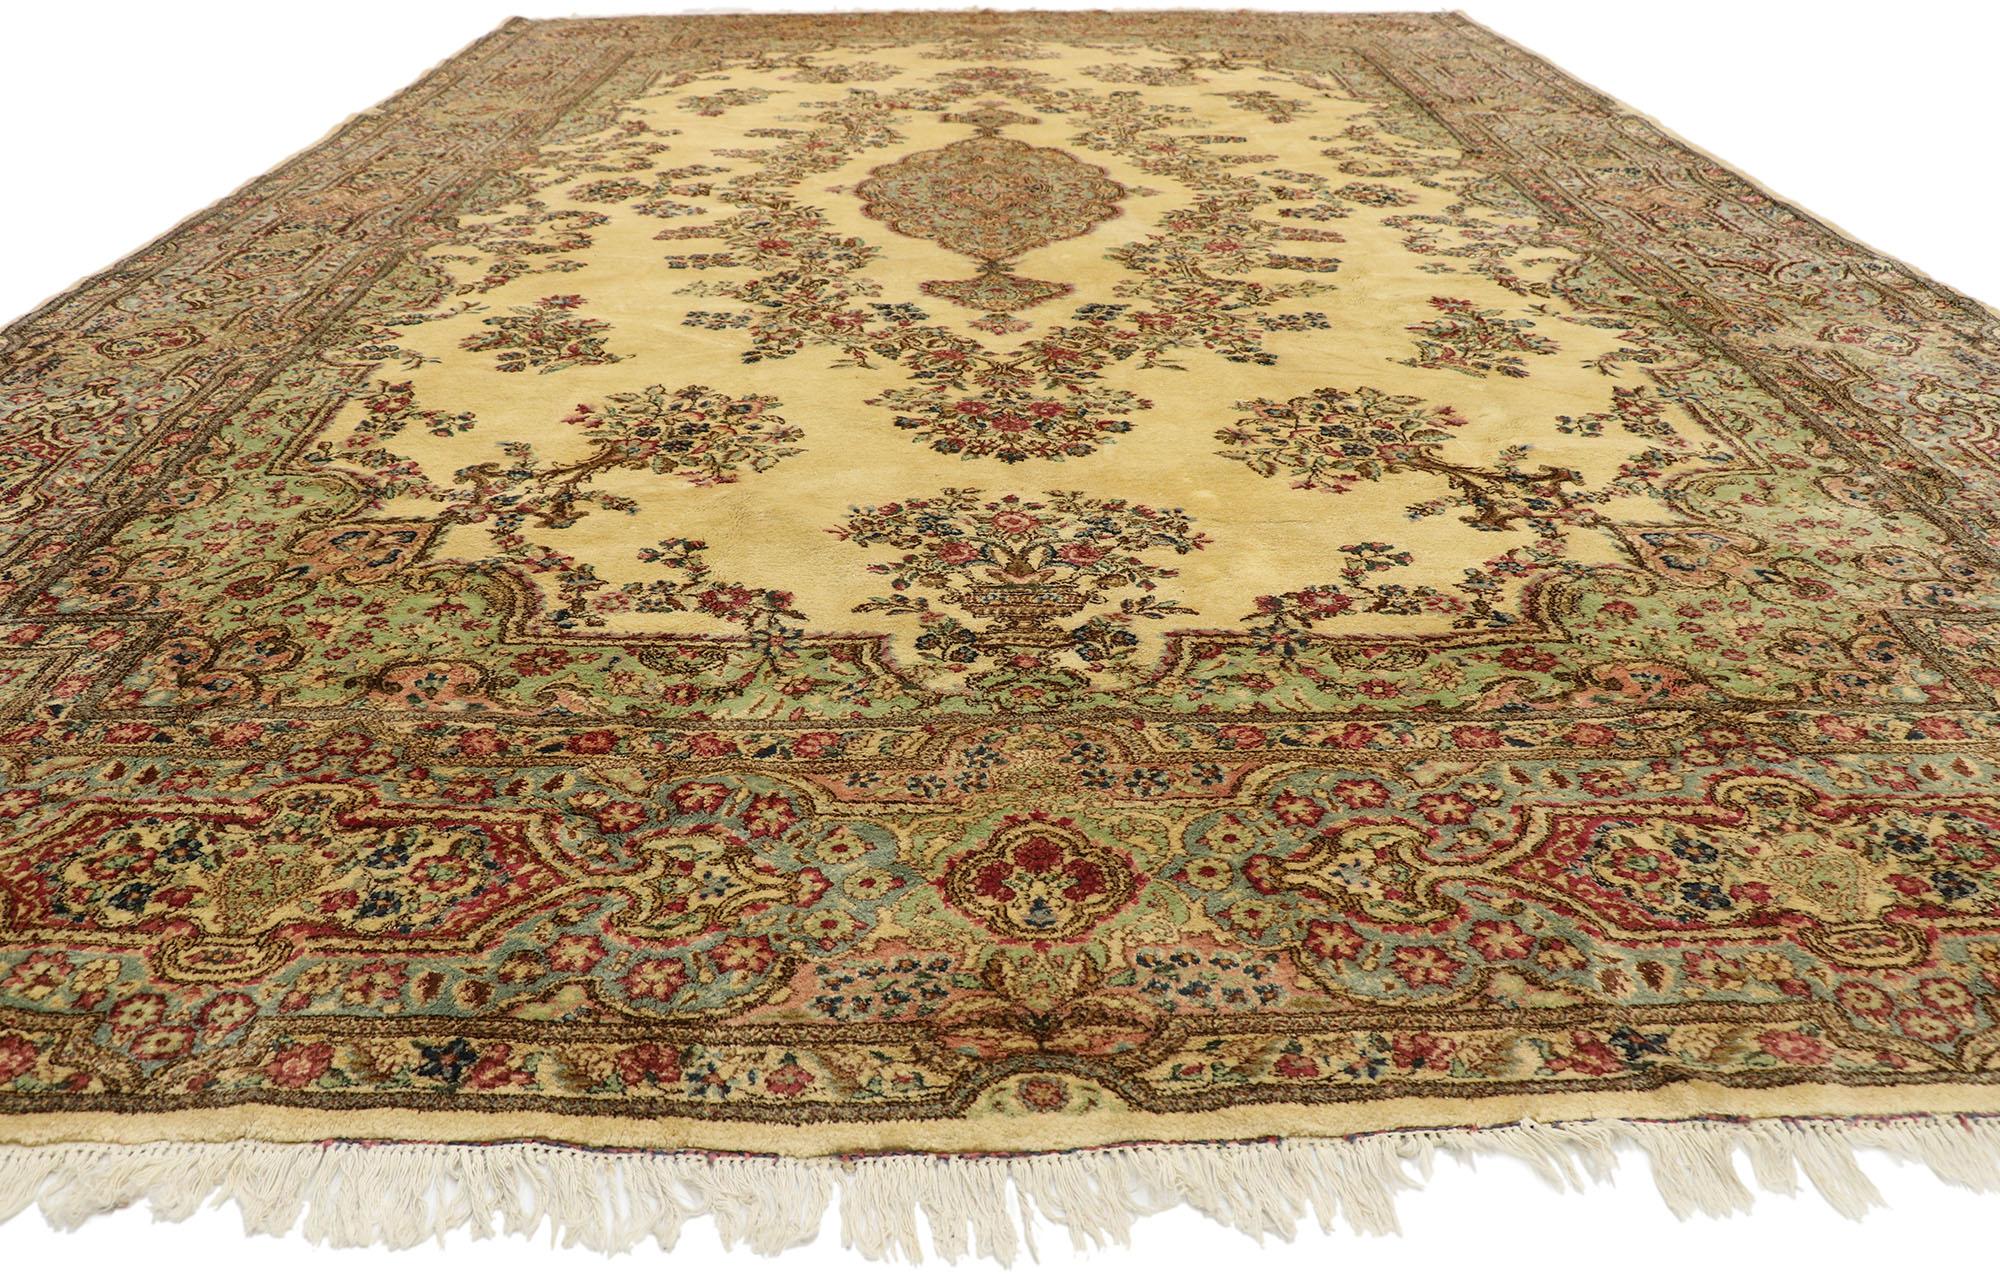 20th Century Oversized Antique Persian Kerman Rug with Romantic French Provincial Style For Sale